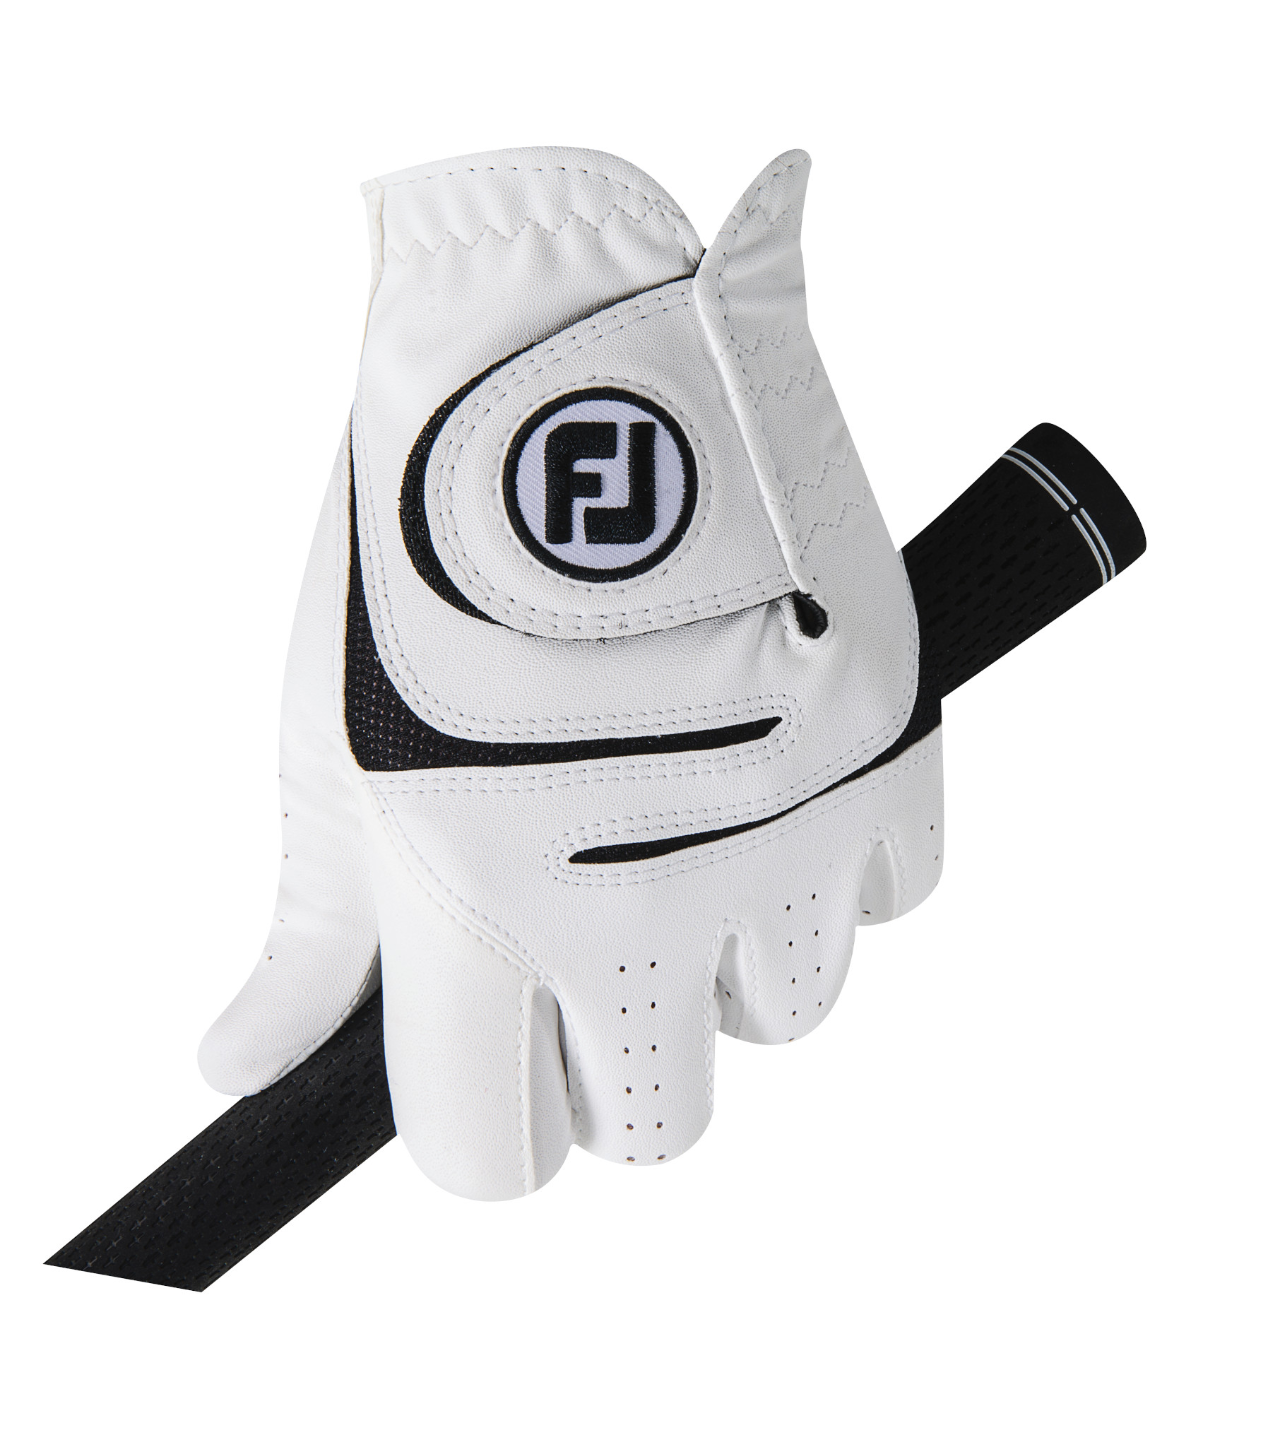 FootJoy Men's WeatherSof Golf Glove - 2 Pack, XL, Left Handed, White - image 3 of 3